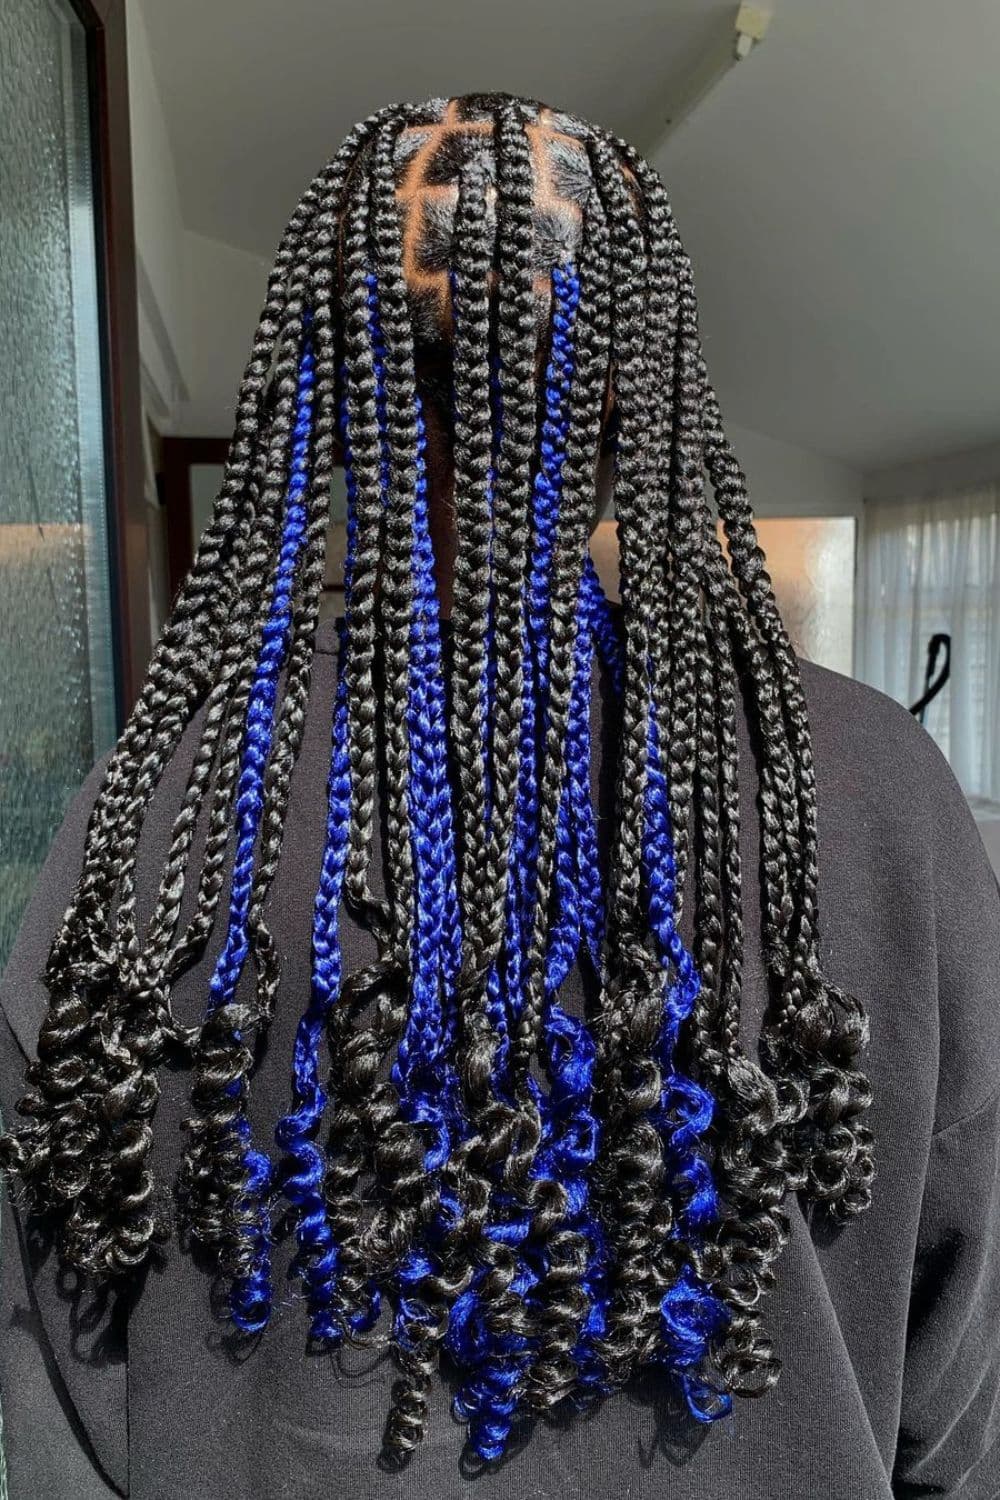 A person with black and blue peekaboo braids.